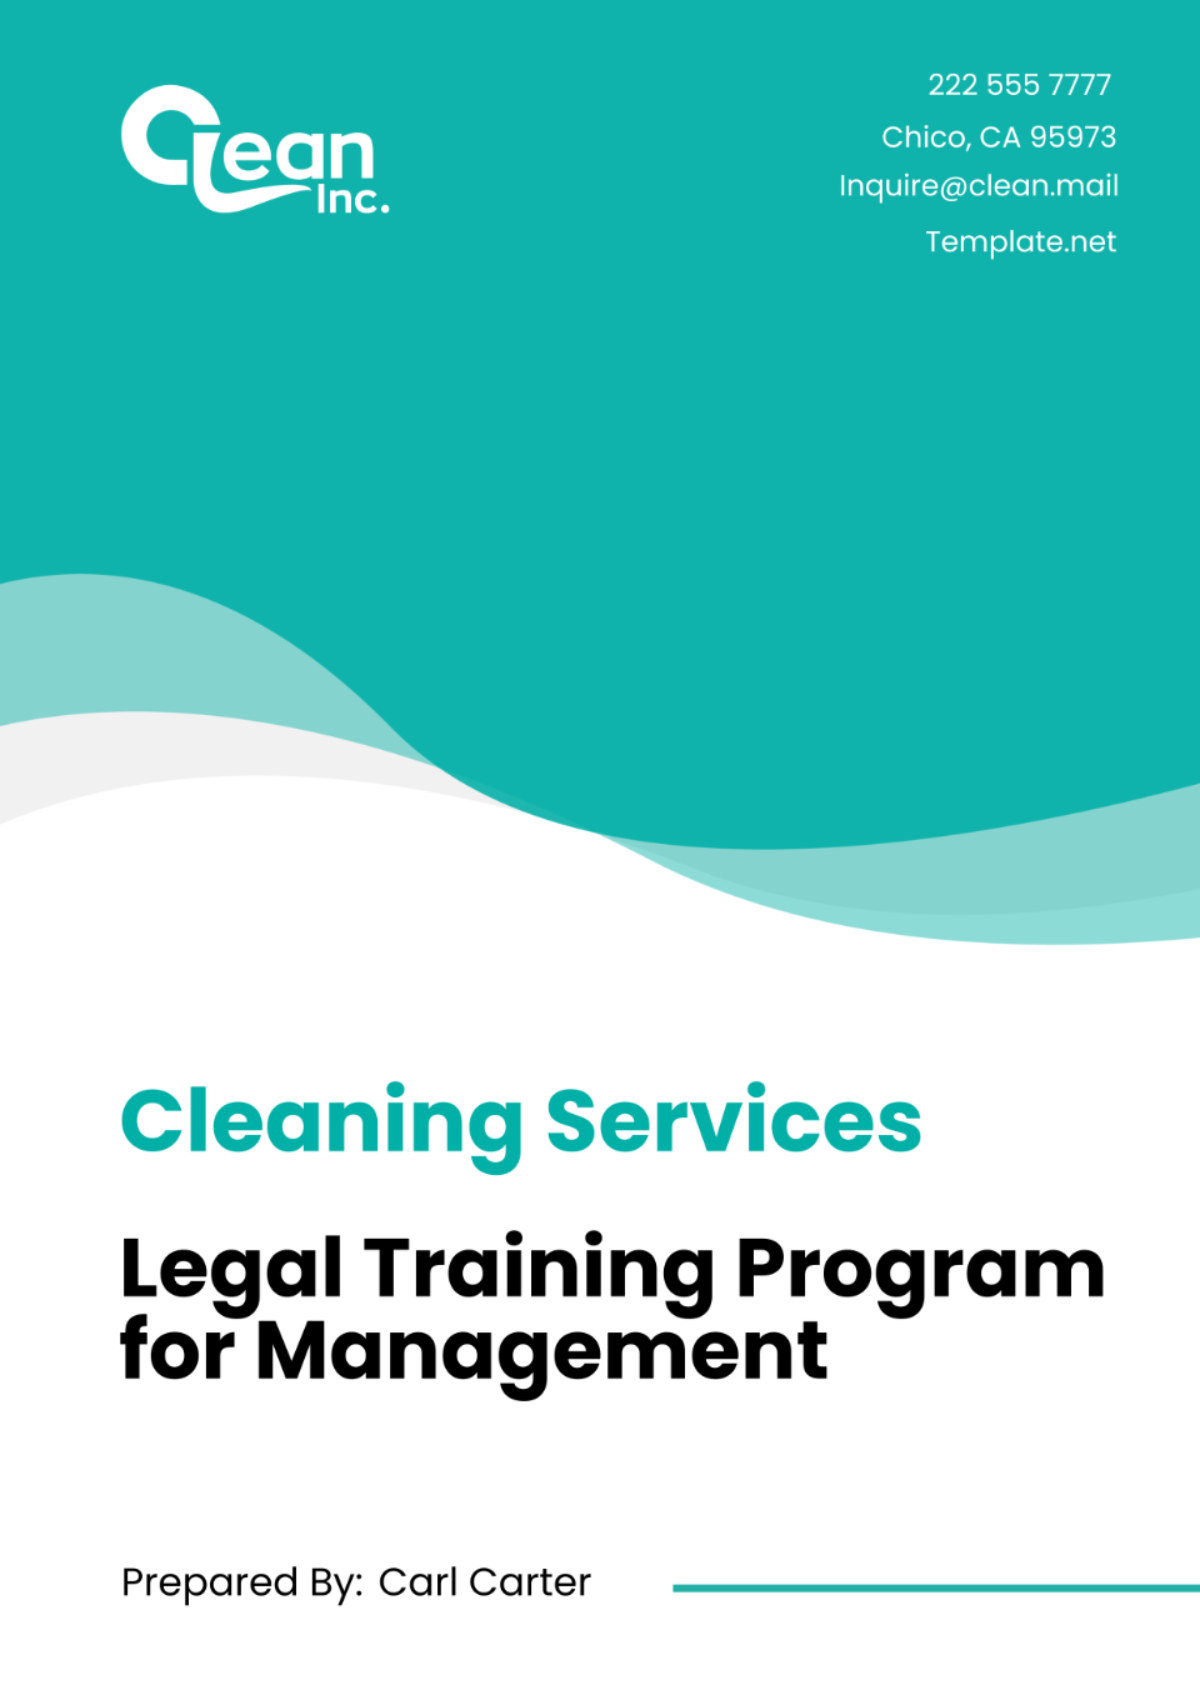 Free Cleaning Services Legal Training Program for Management Template